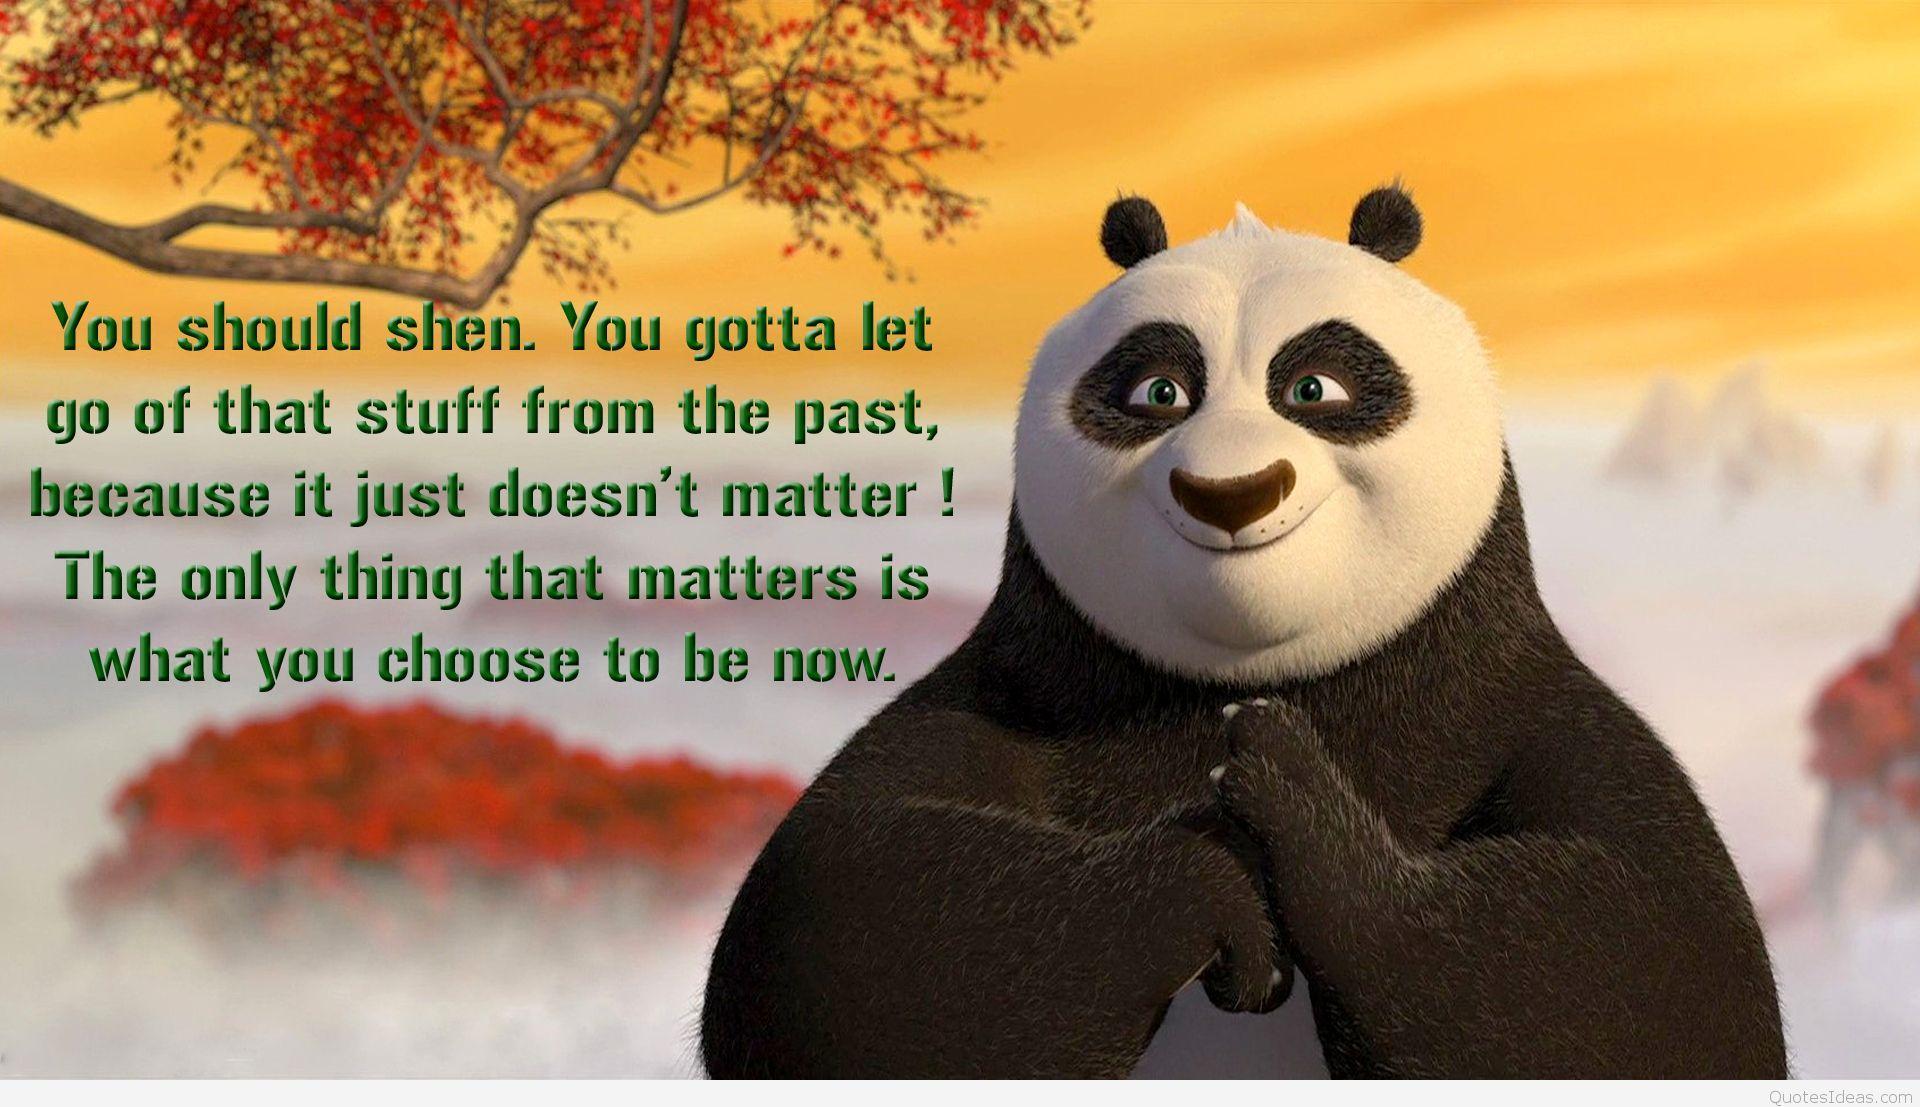 Funny Kung Fu Panda quotes, sayings, picture and wallpaper